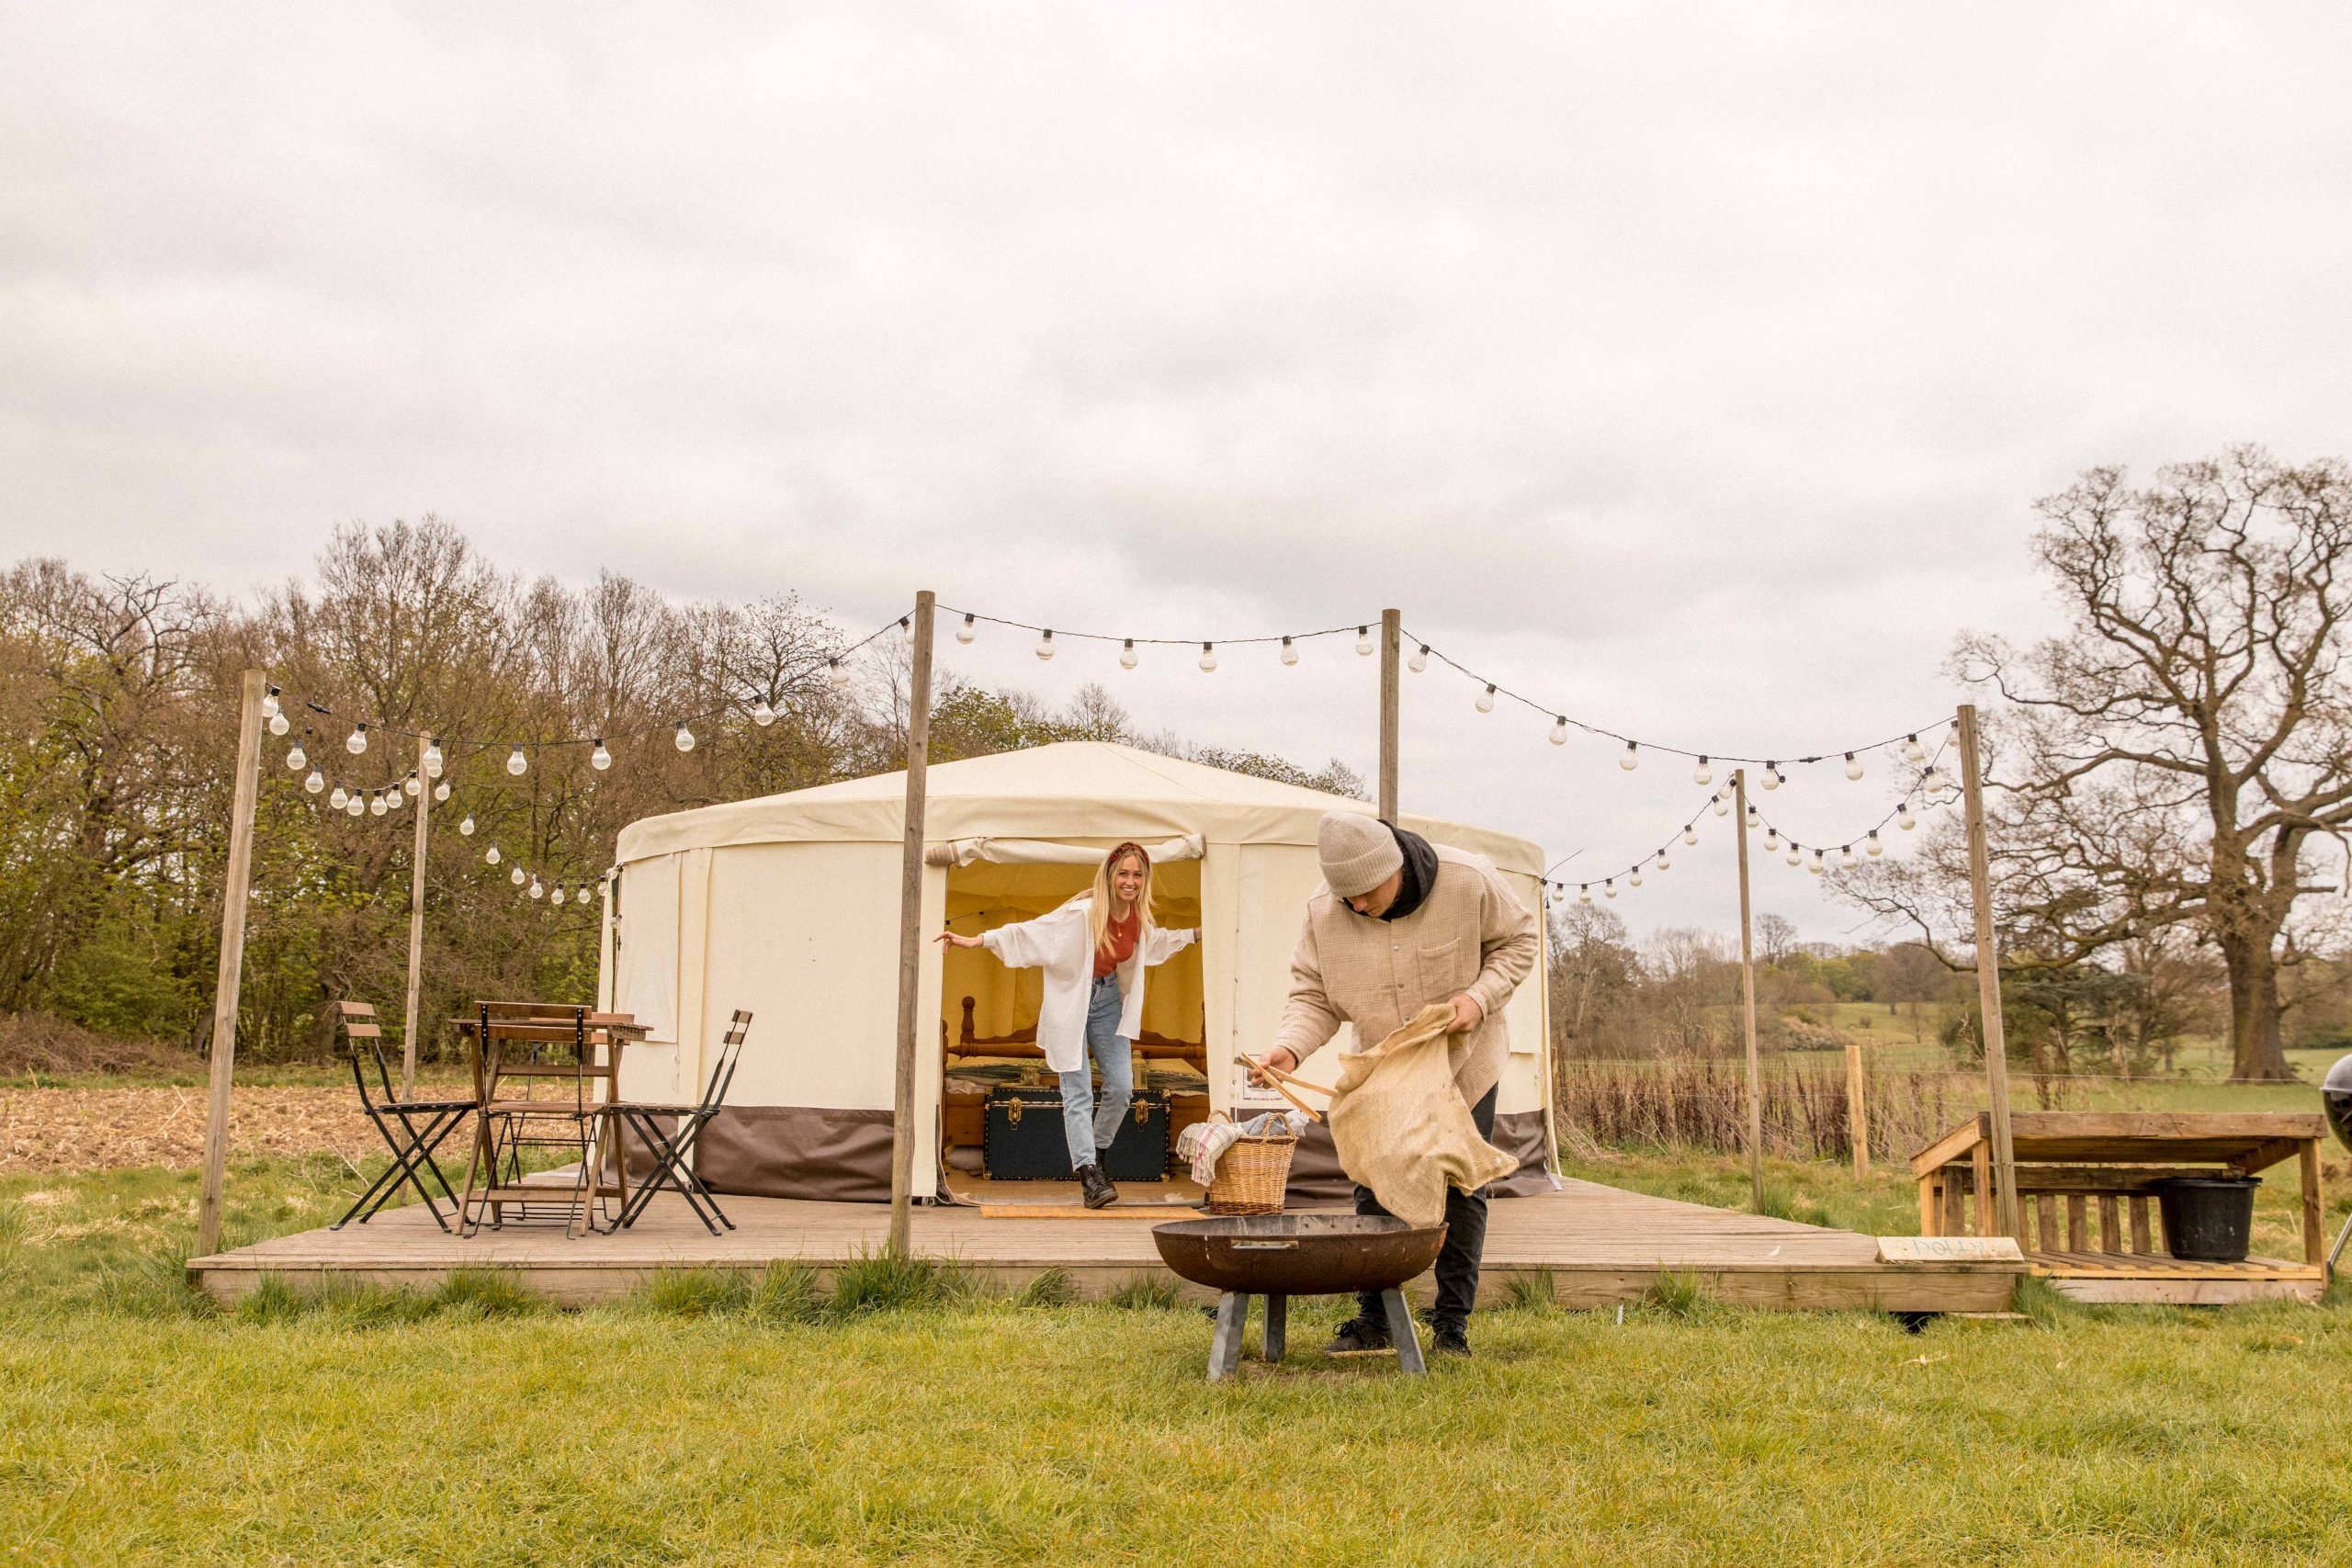 Photoshoot at a Glamping site near London